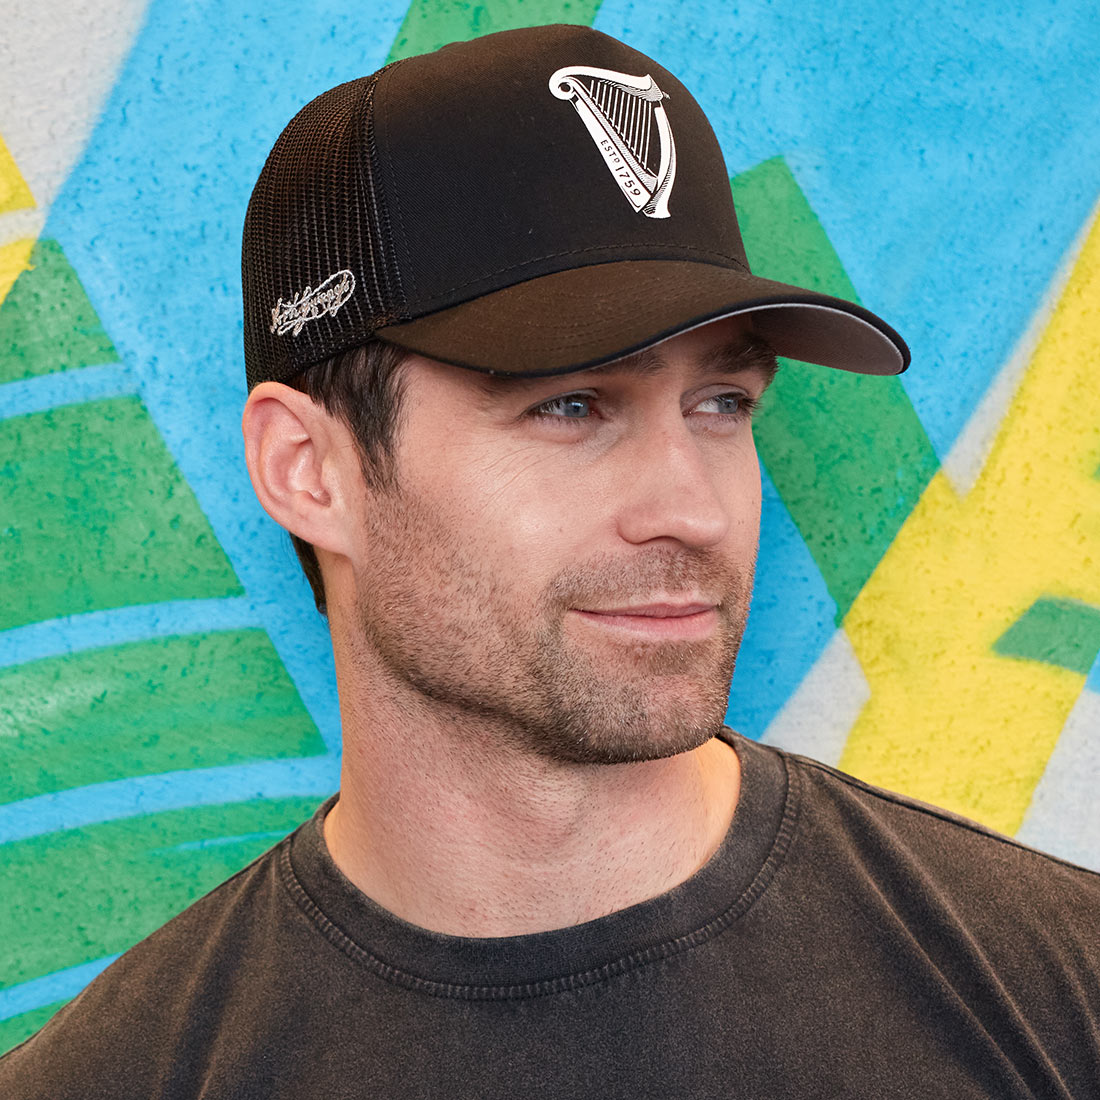 A man wearing a Guinness Premium Black & White Harp Cap in front of a colorful wall.